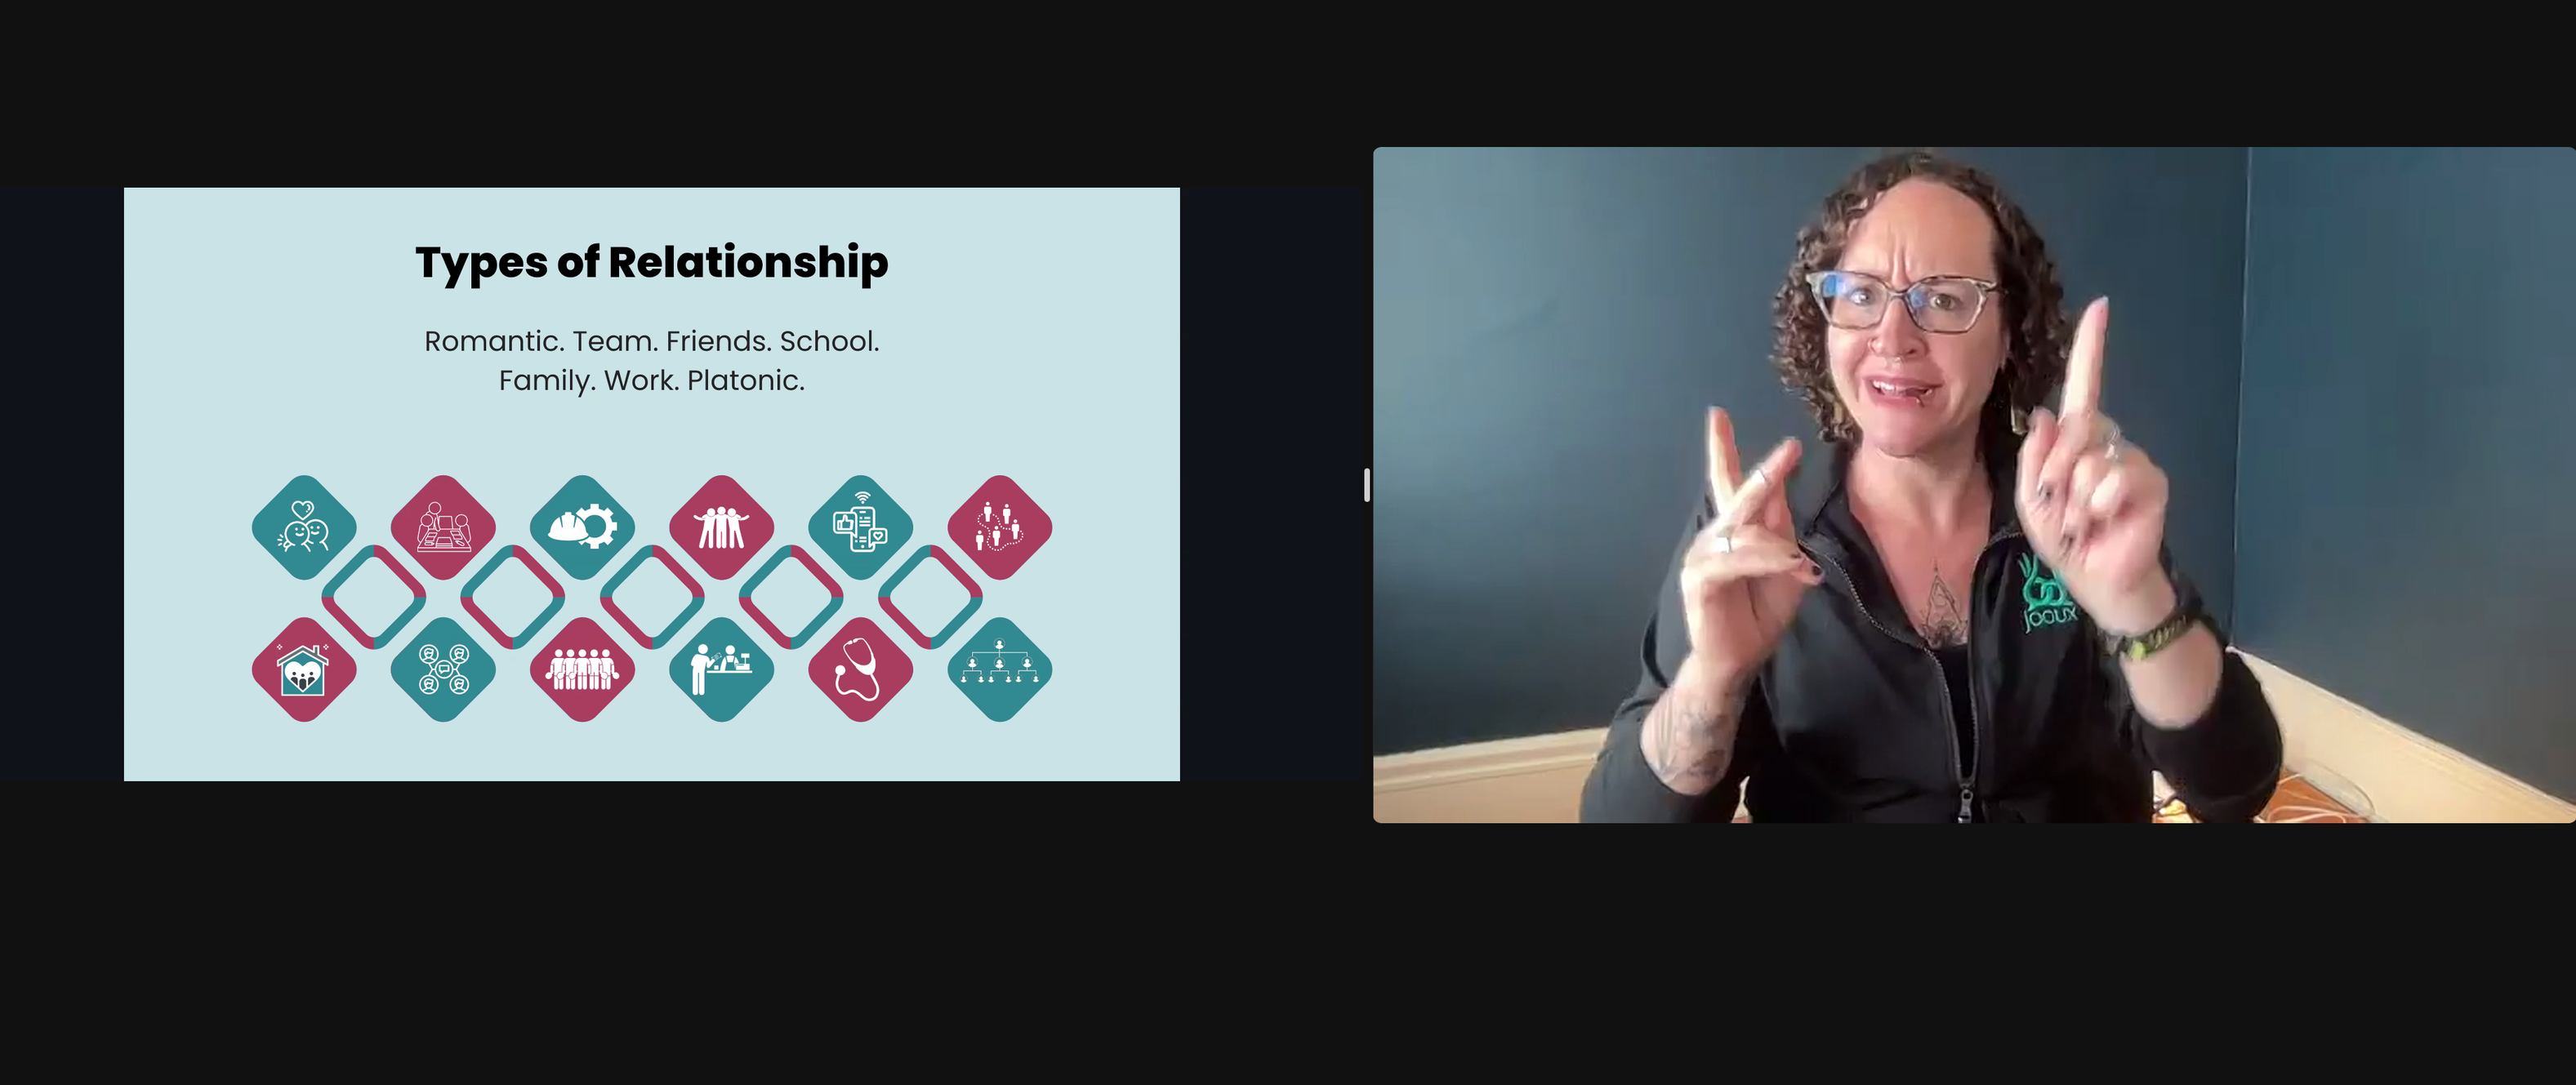 Image description: Bee Gehman is dressed in black with glasses and brown curl hair, she recently taught a Wellness Workshop on Communication in relationships, and the slide beside her shows the different types of relationships.